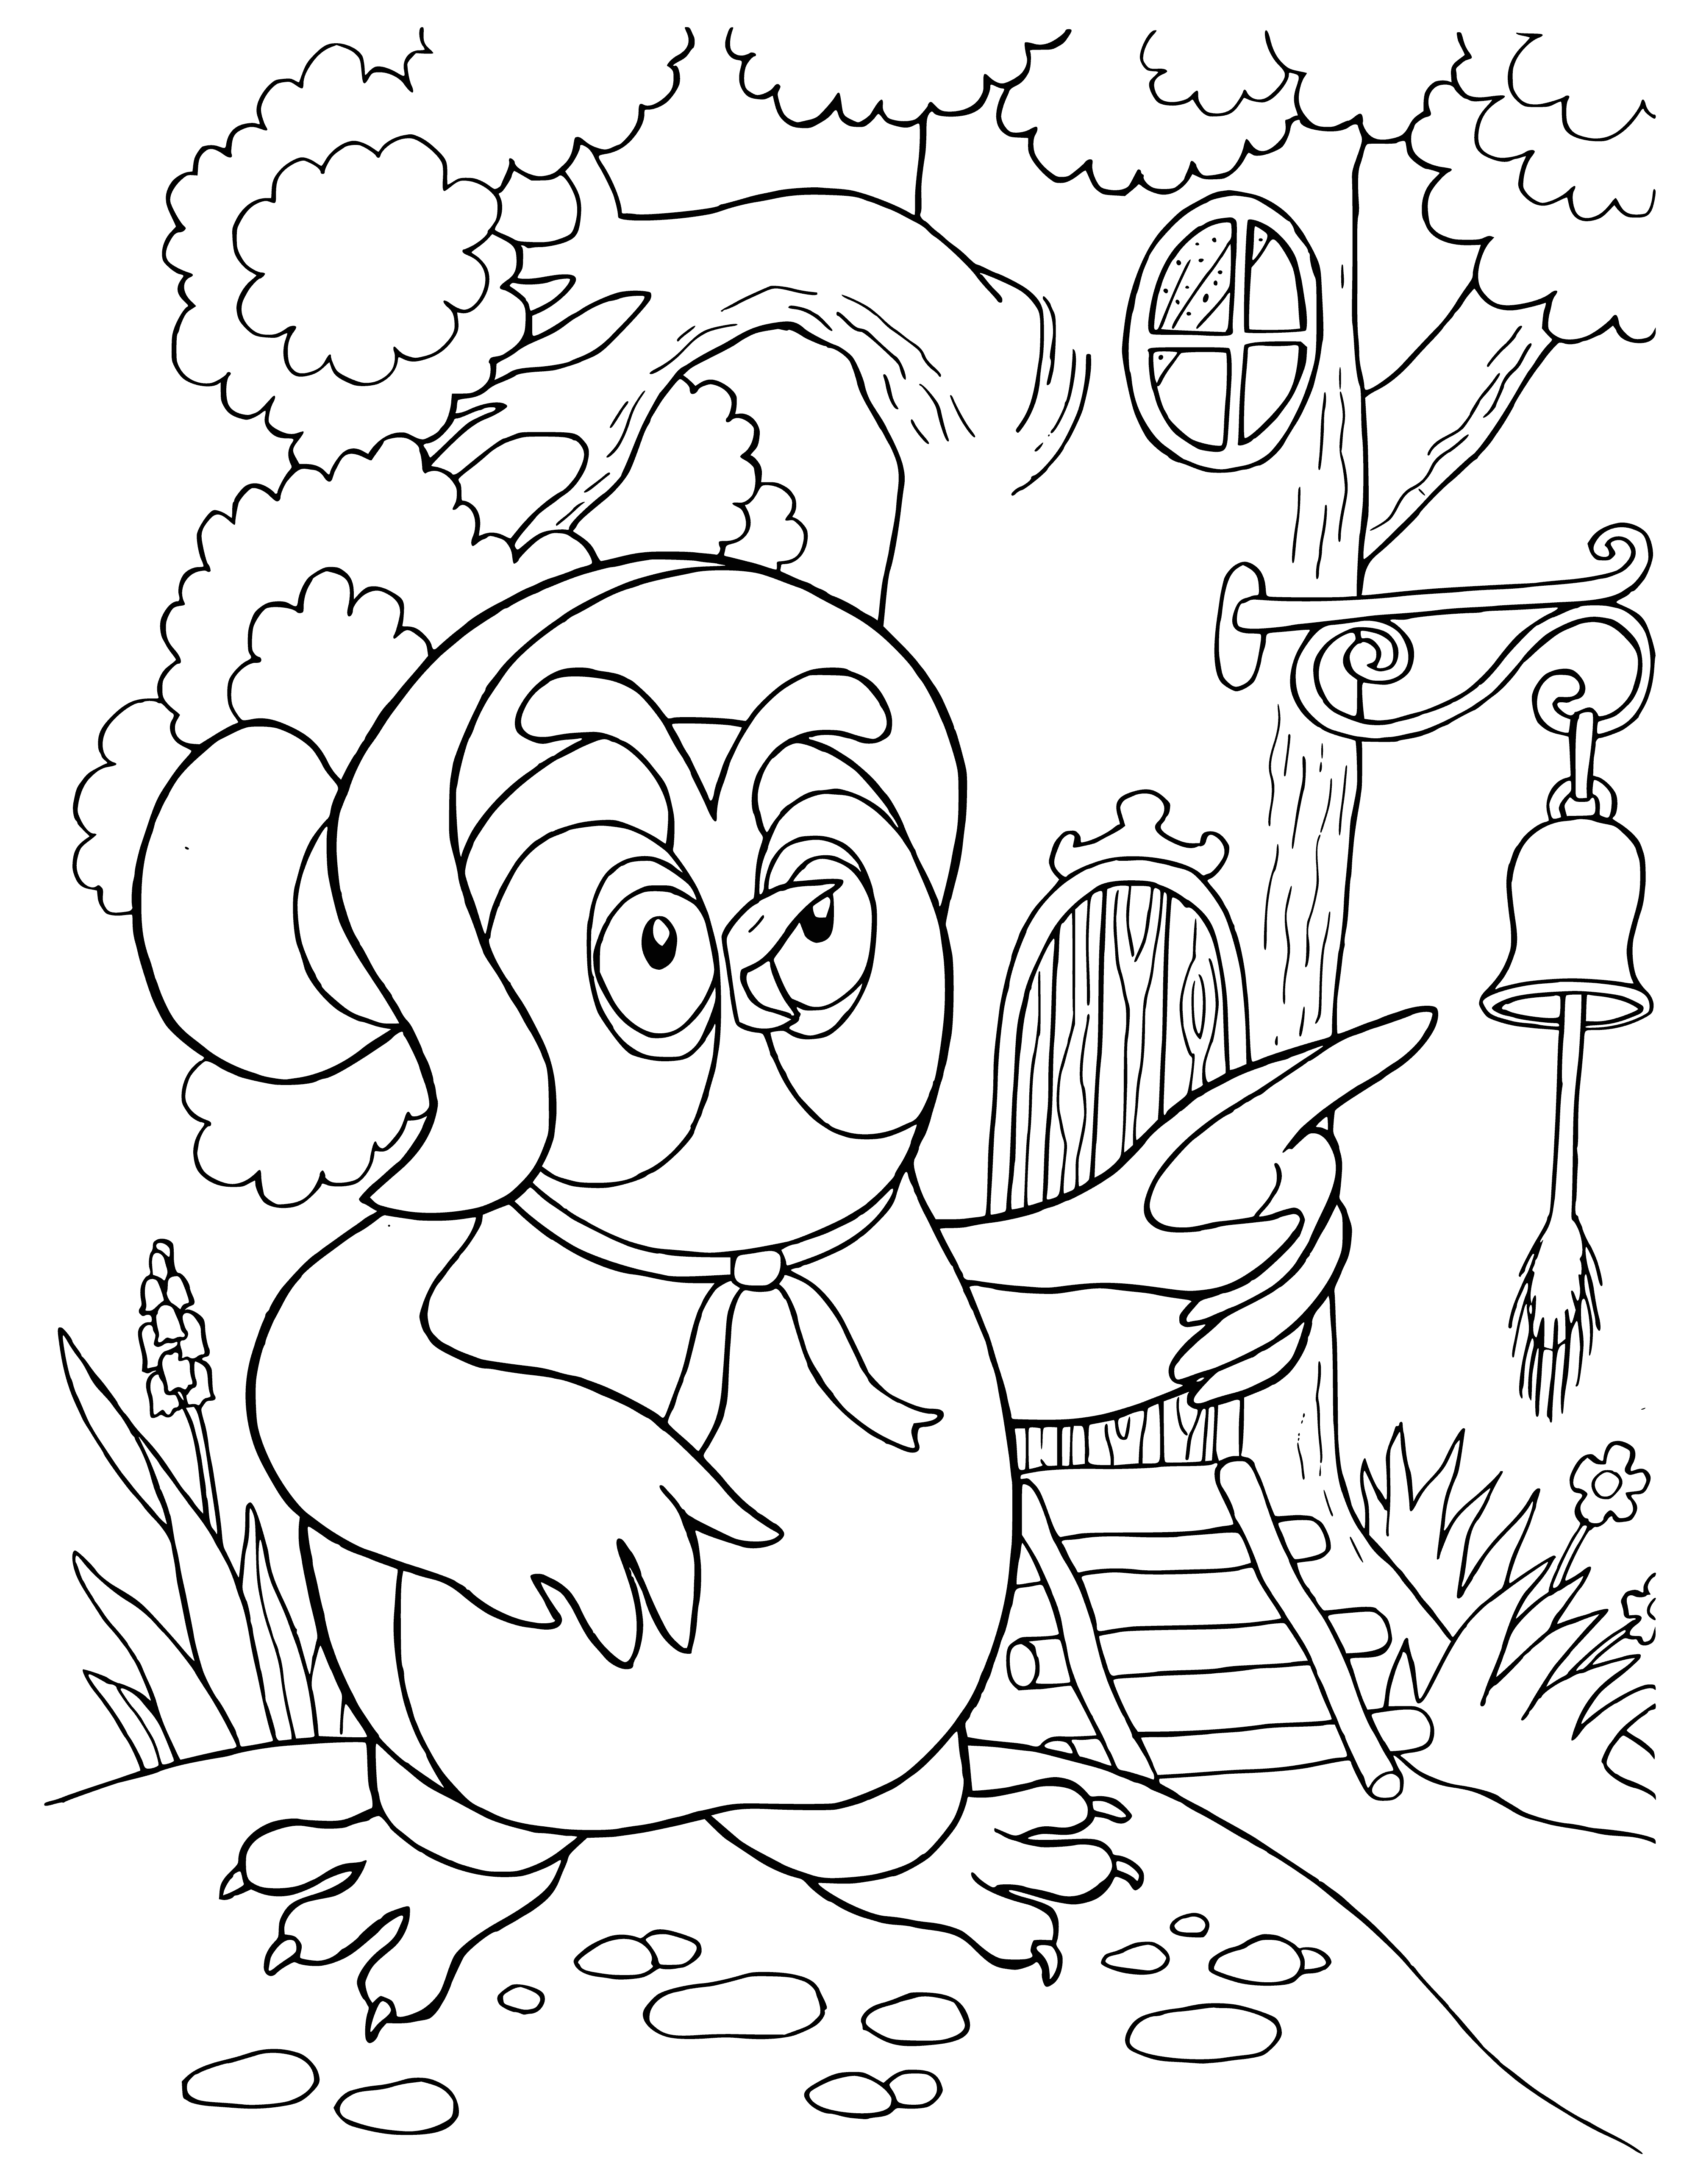 coloring page: Winnie the Pooh encounters an owl on a tree branch: yellow feathered, brown body, curved yellow beak, & large, round eyes.